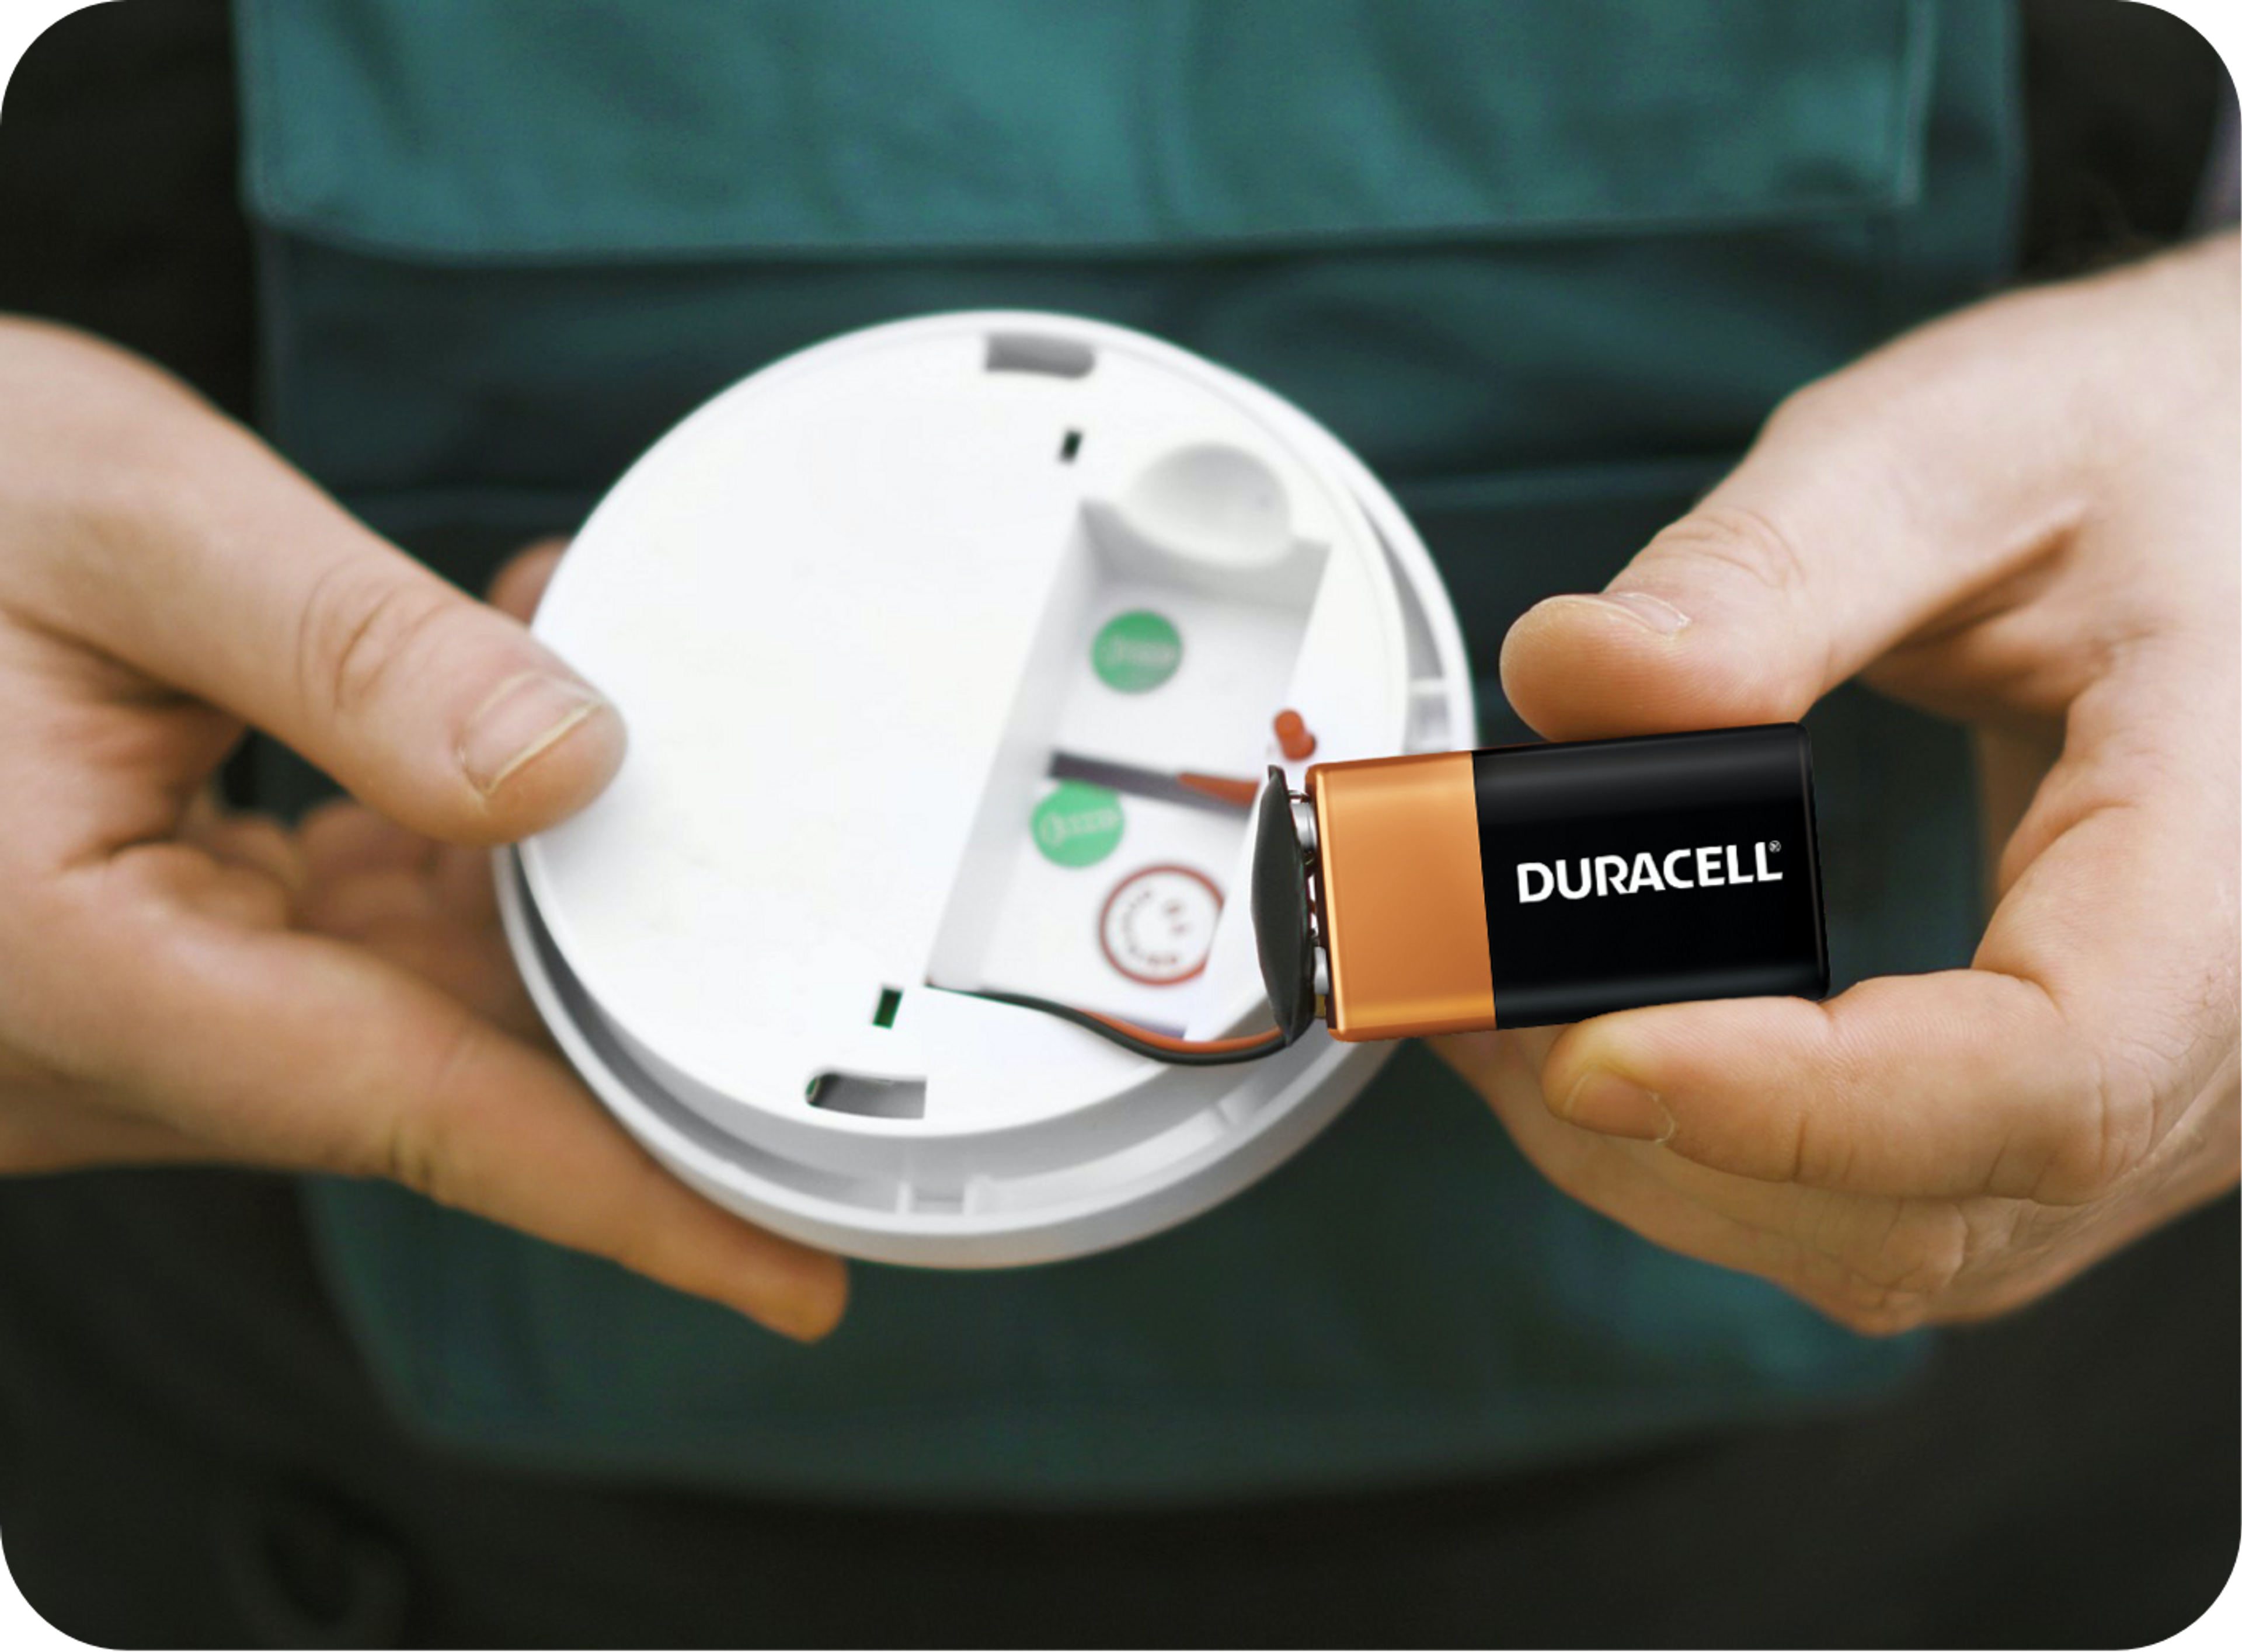 Picture of smoke detector and duracel battery being held by a Caucasian man's hands